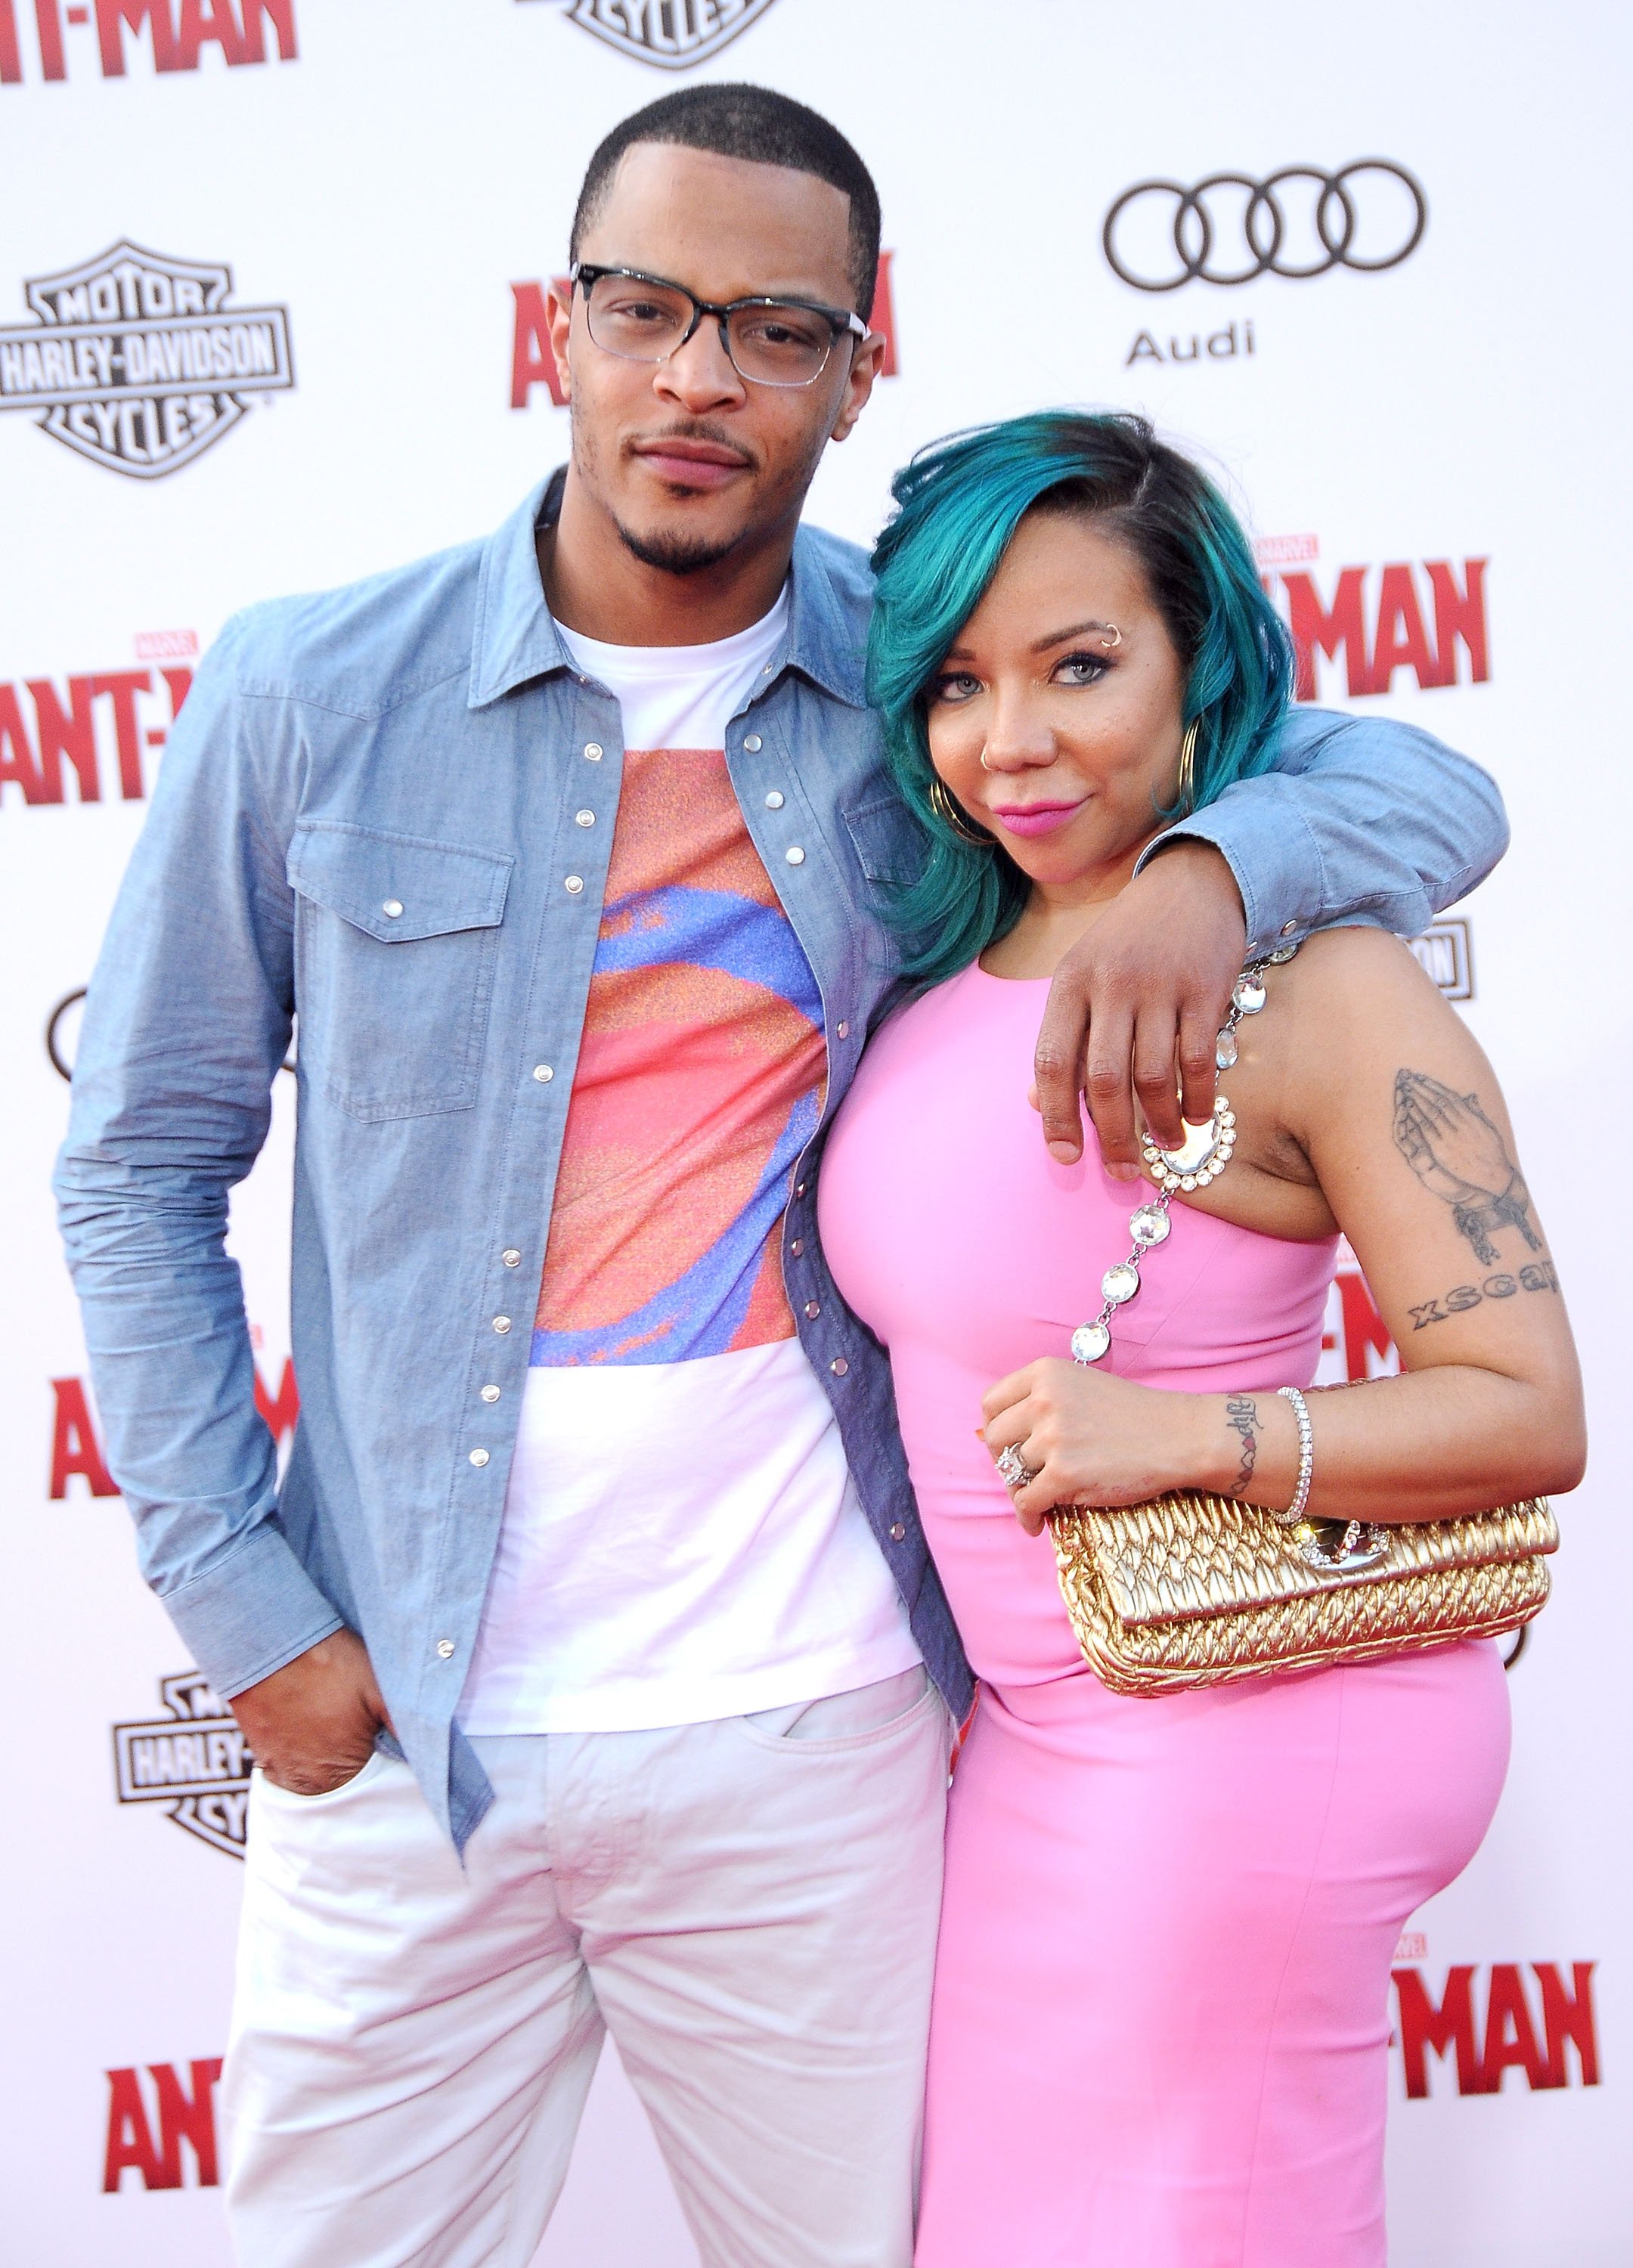 TI Tiny Open up about Why They Called off Their Divorce on #39 Red Table